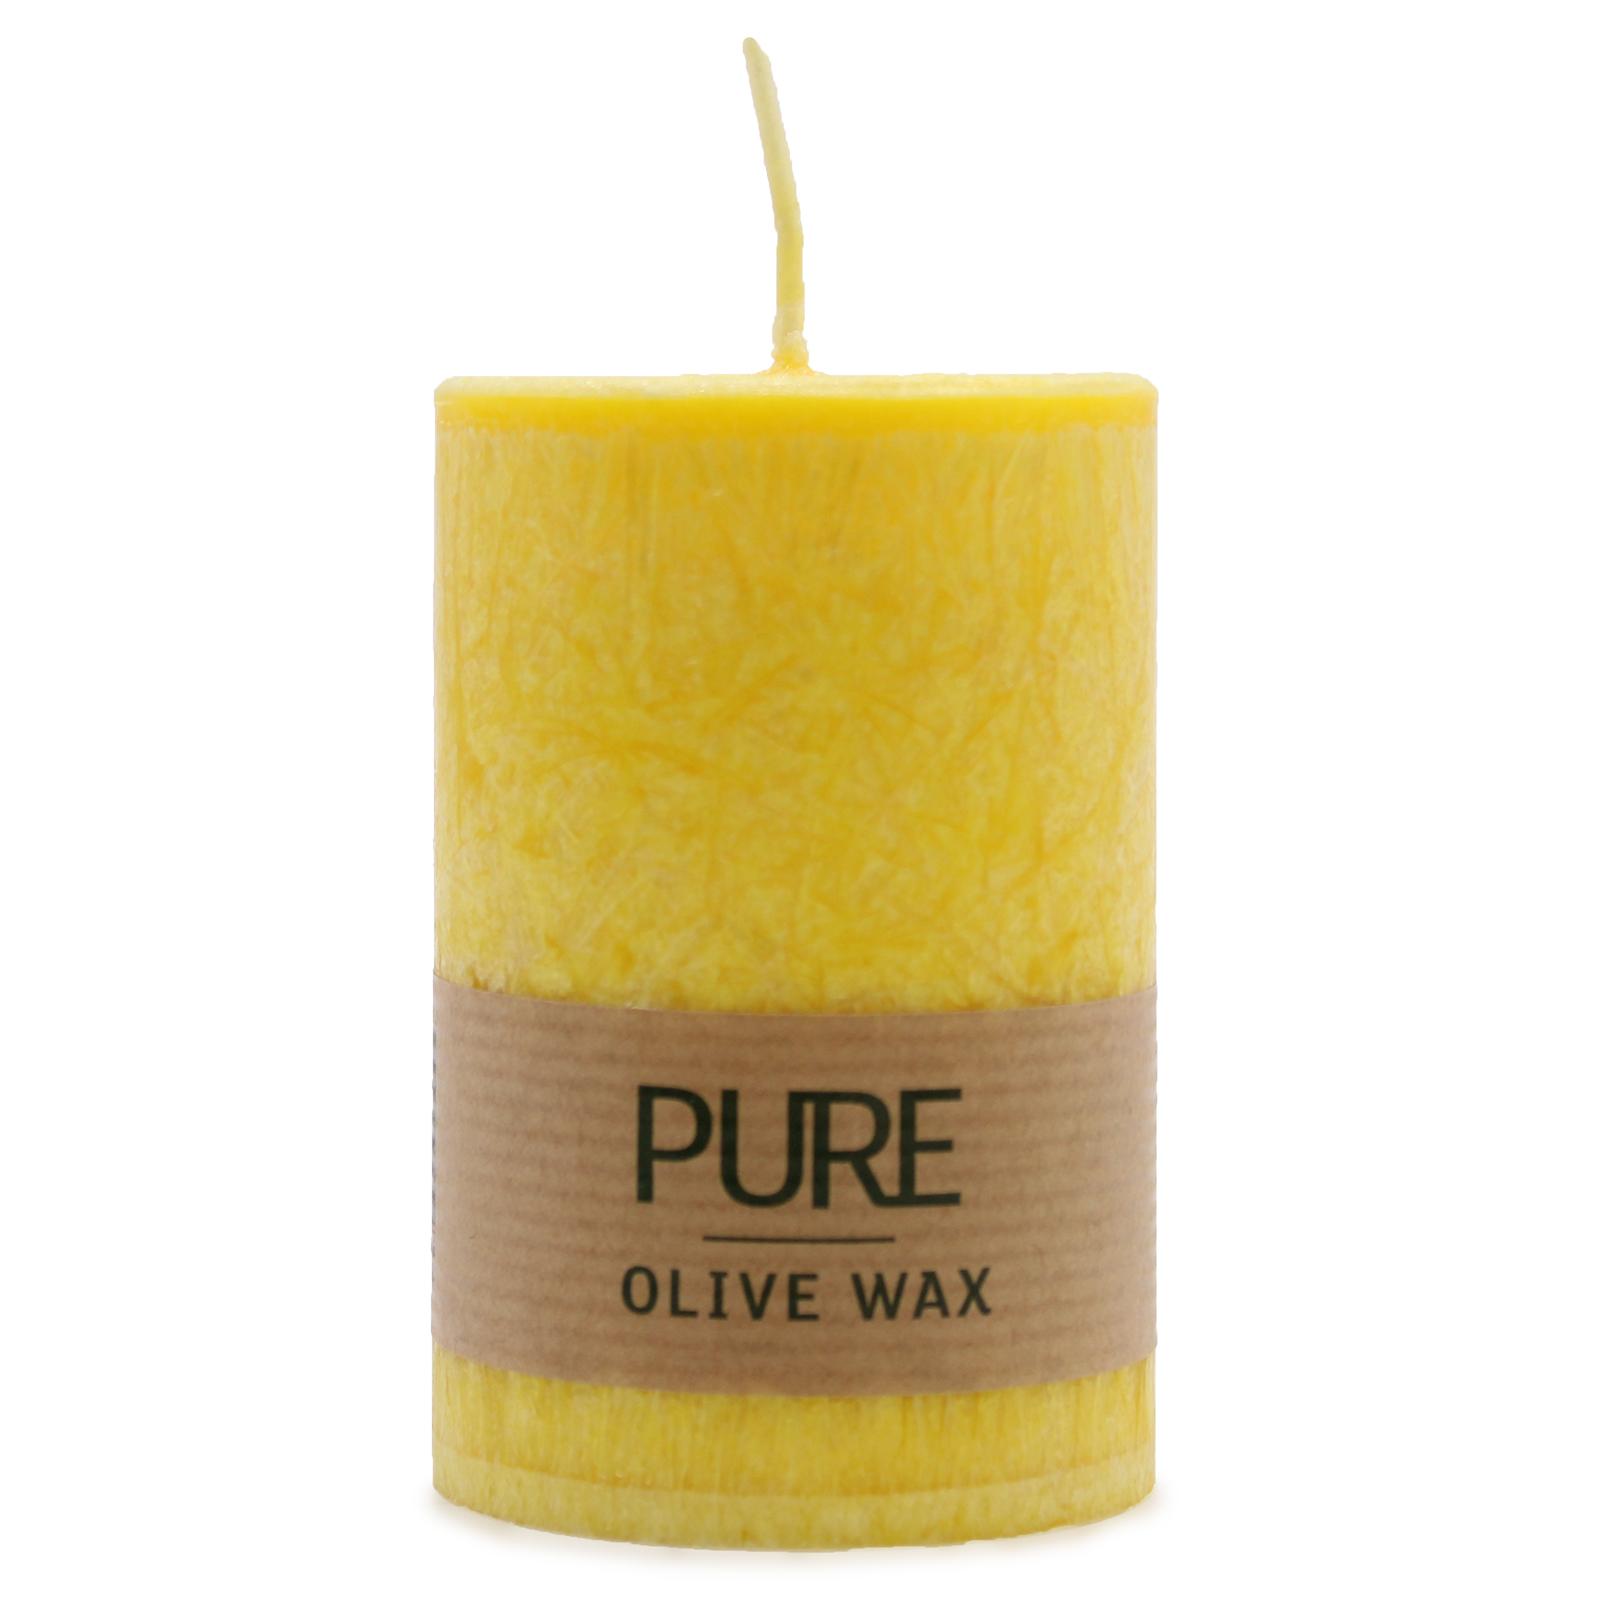 Vegan-Friendly Pure Olive Wax Candle 90x60 - Yellow